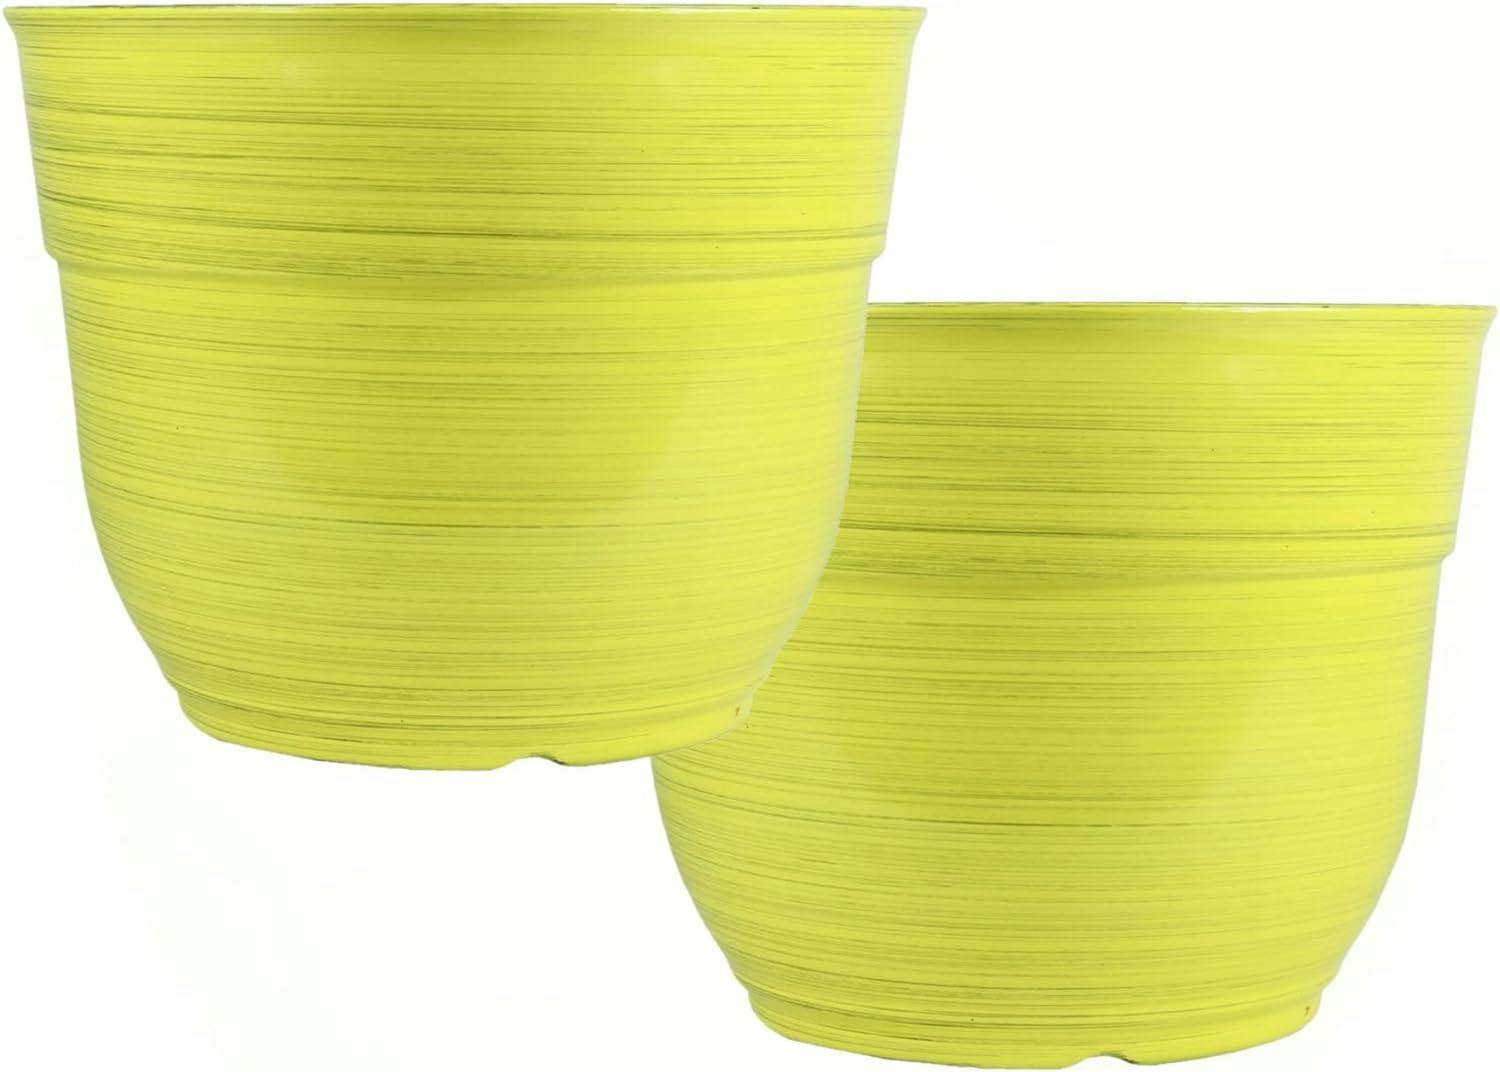 Bright Yellow Modern Large Plastic Planter 15" with Drainage Hole